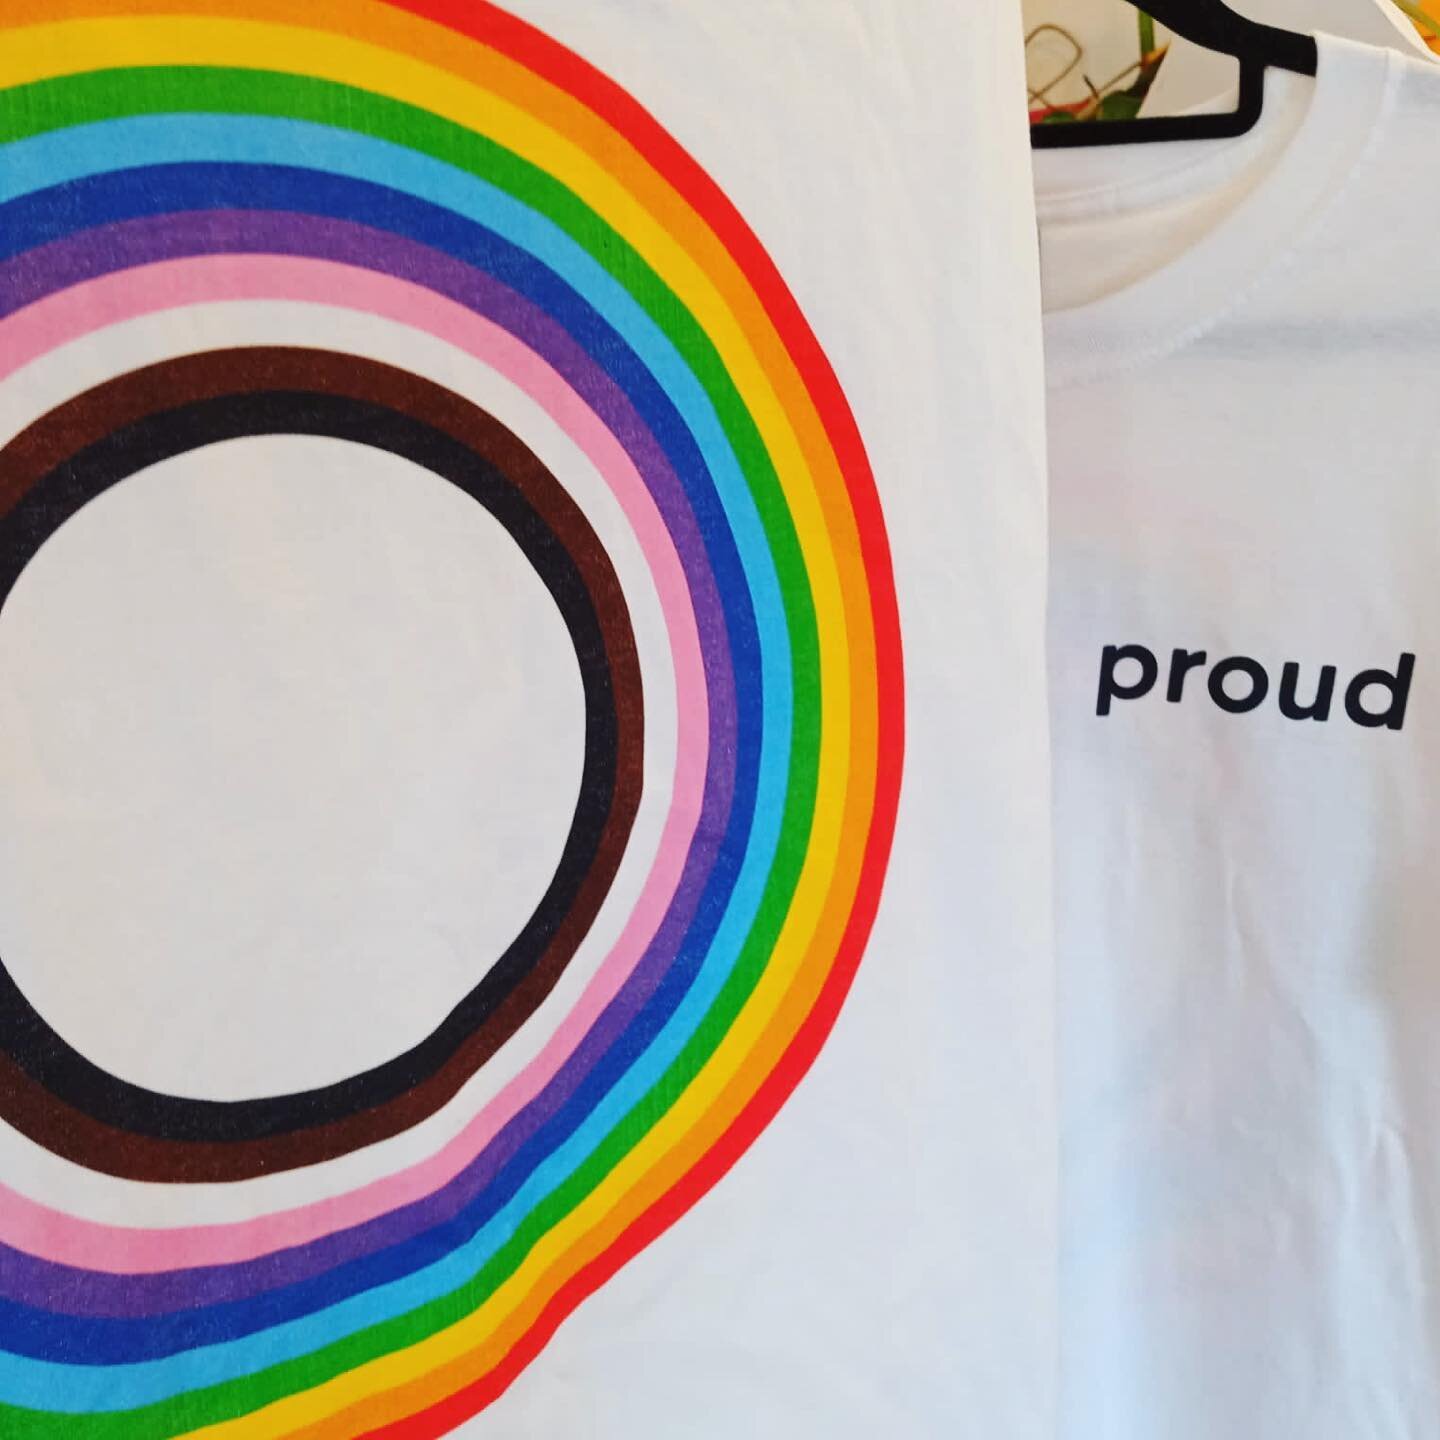 Come and nab your very own INFINITY RAINBOW TEE TODAY intime for the most joyful weekend of the year @margatepride 
These tee&rsquo;s were designed by our very own @jimbidd and printed right here in Margate! 10% of all sales go straight back to Marga